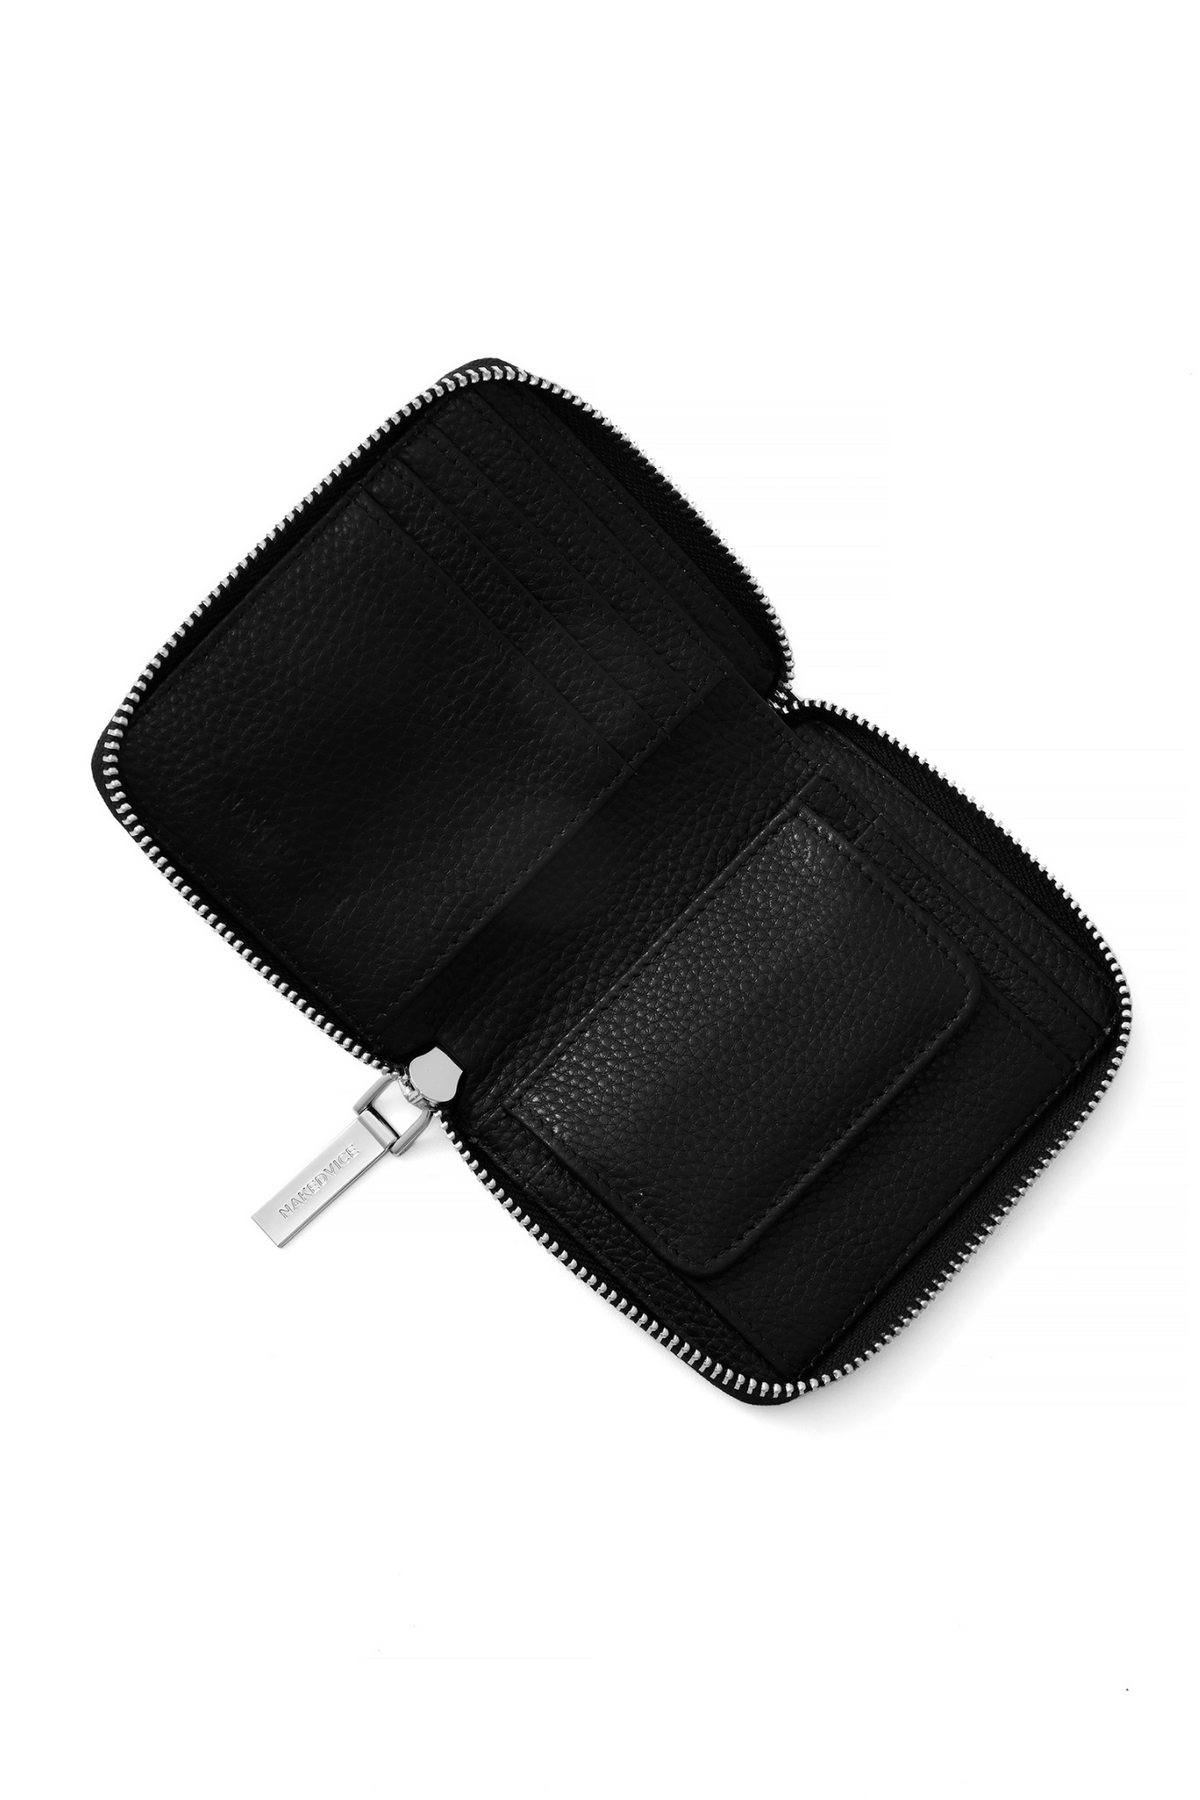 THE THEO WALLET - SILVER